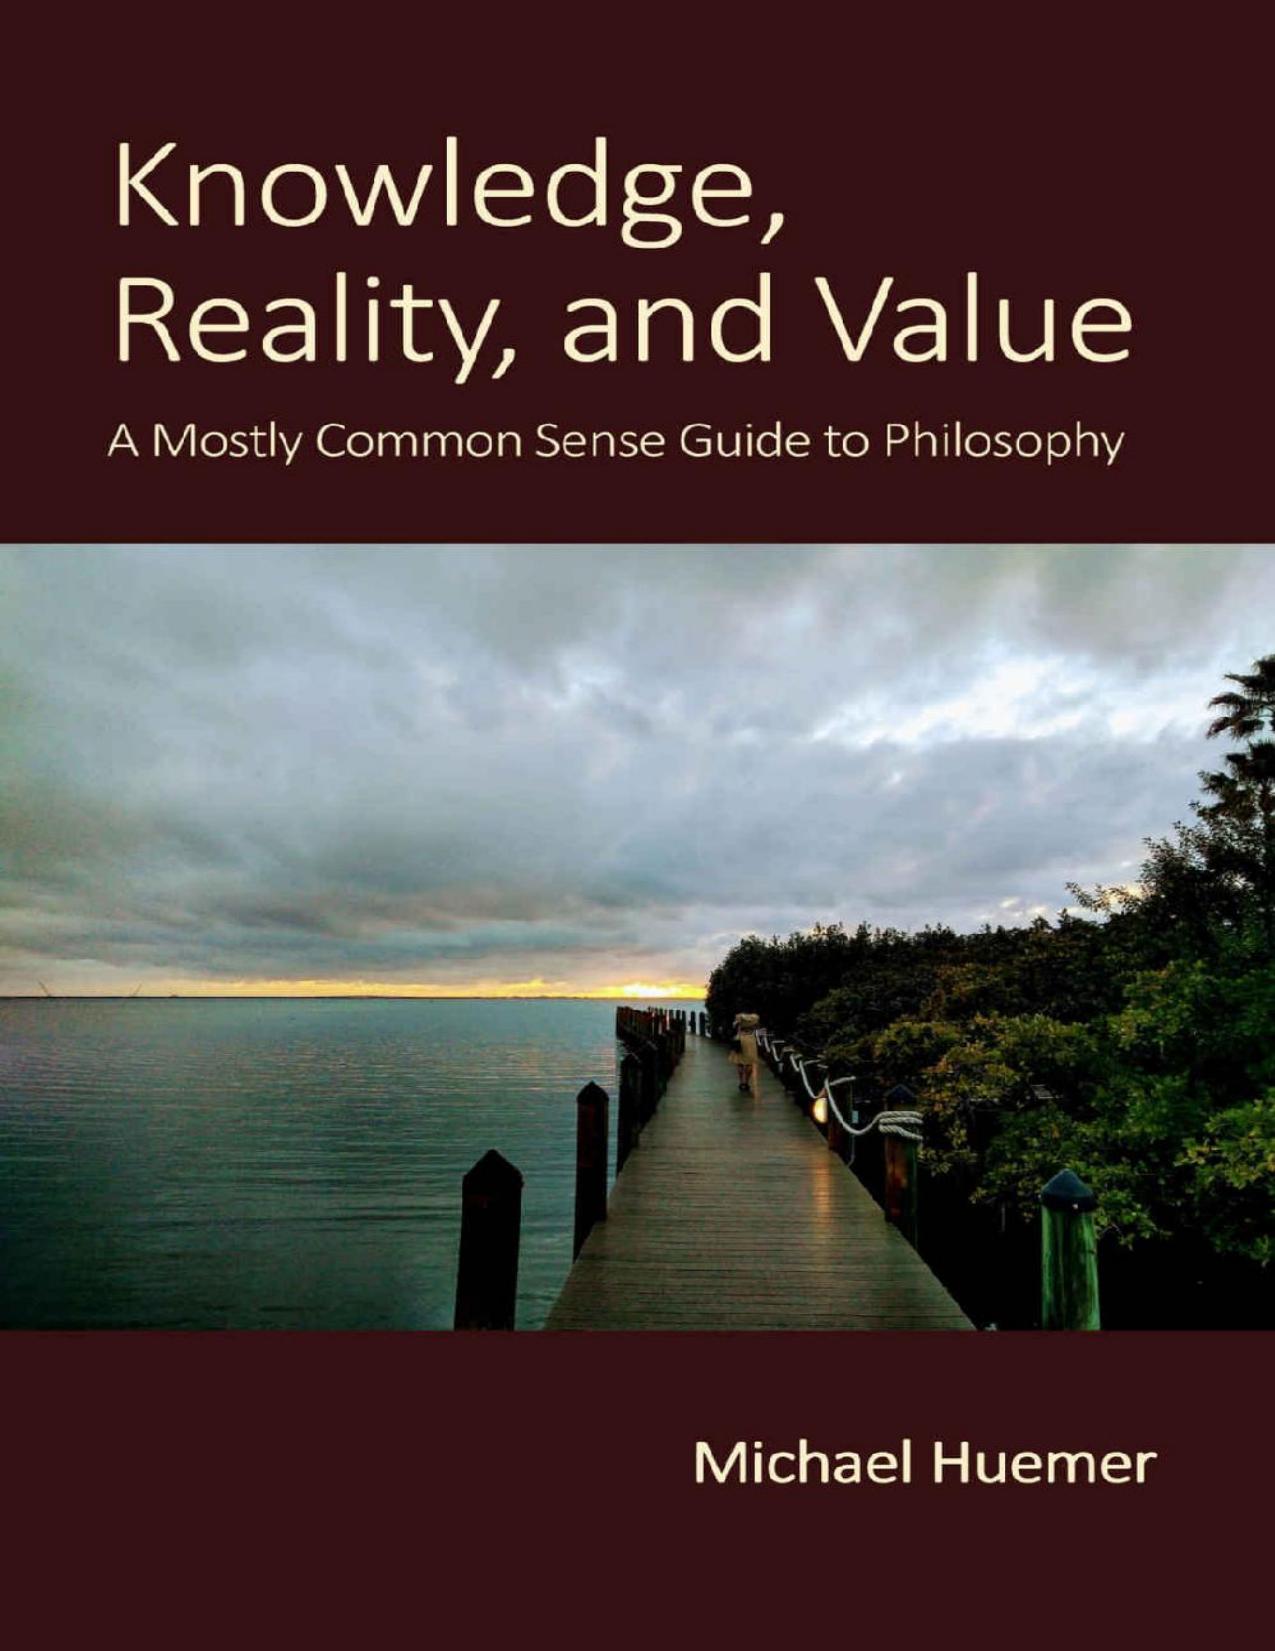 Knowledge, Reality, and Value: A Mostly Common Sense Guide to Philosophy